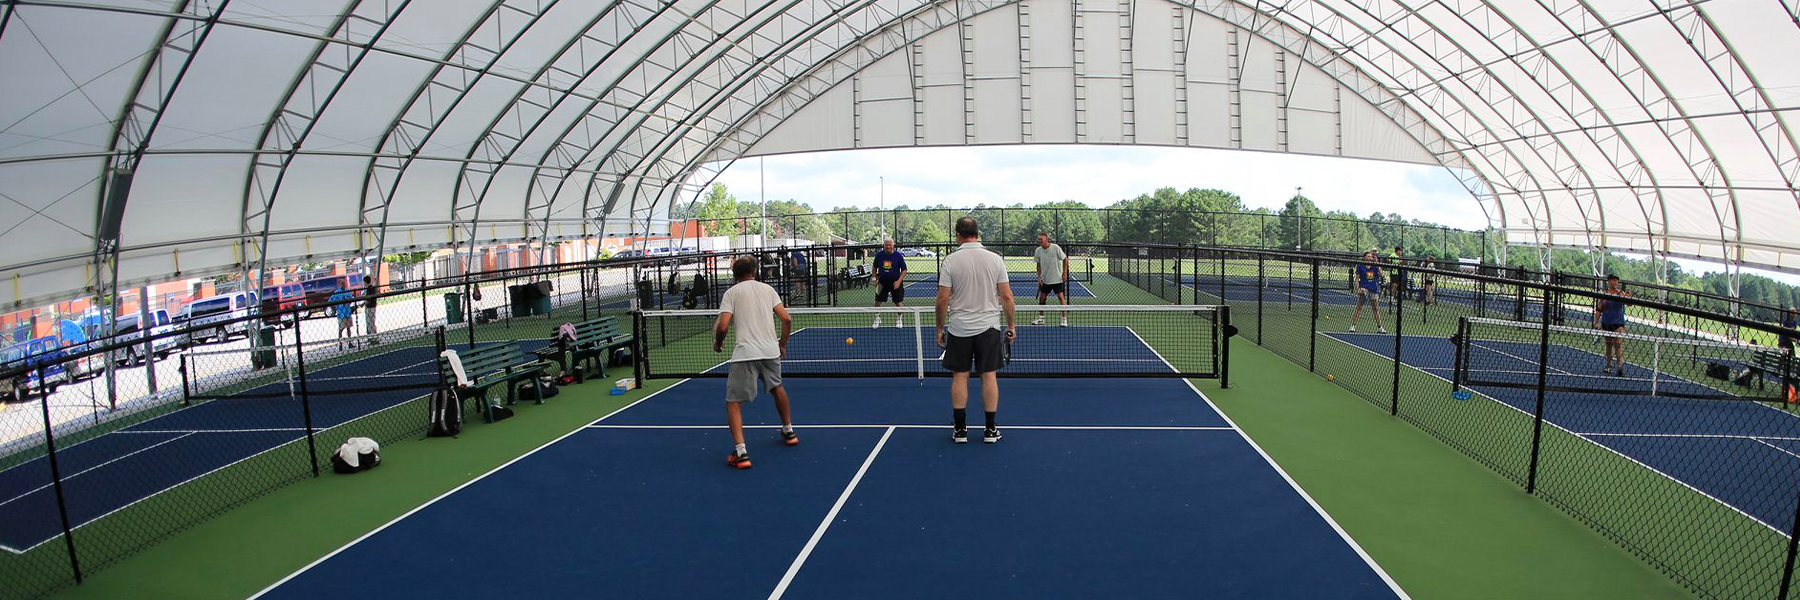 Pickleball Courts Protected by a ClearSpan Fabric Structure ClearSpan